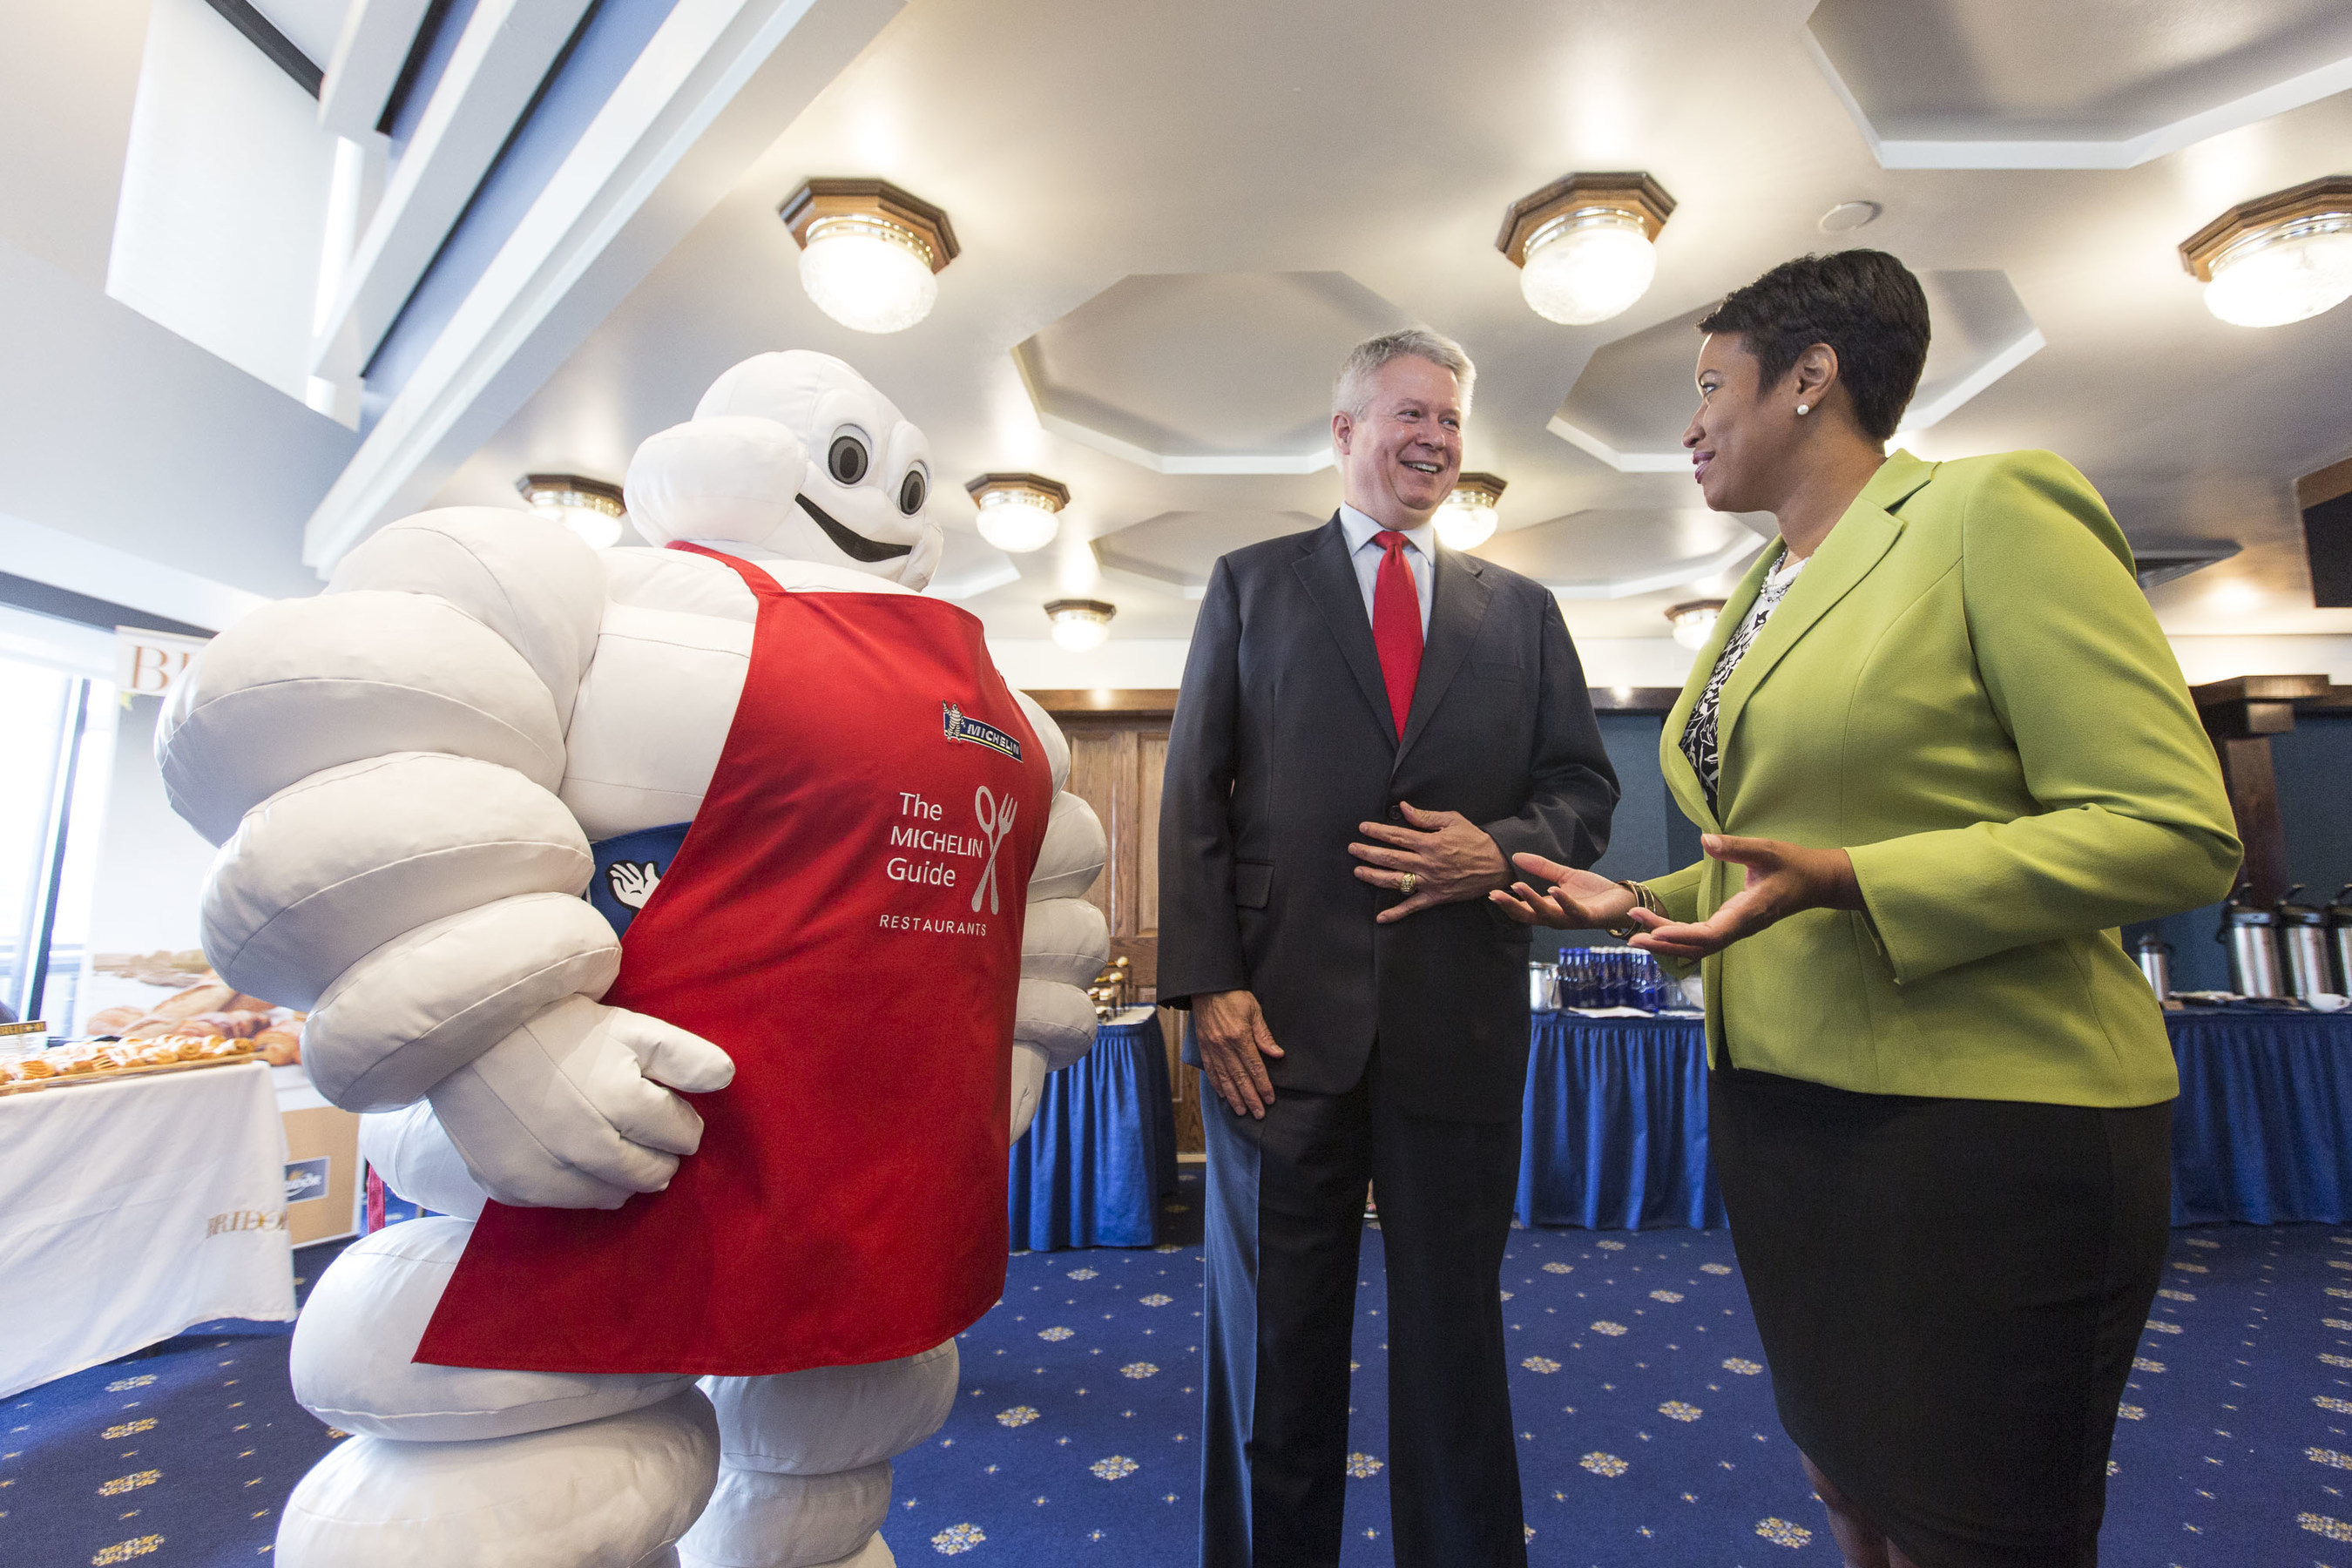 DC Mayor Muriel Bowser and Michelin CEO Pete Selleck are greeted by the Michelin Man at a press conference announcing the arrival of the Michelin Guide to Washington, DC at the National Press Club, May 31, 2016.